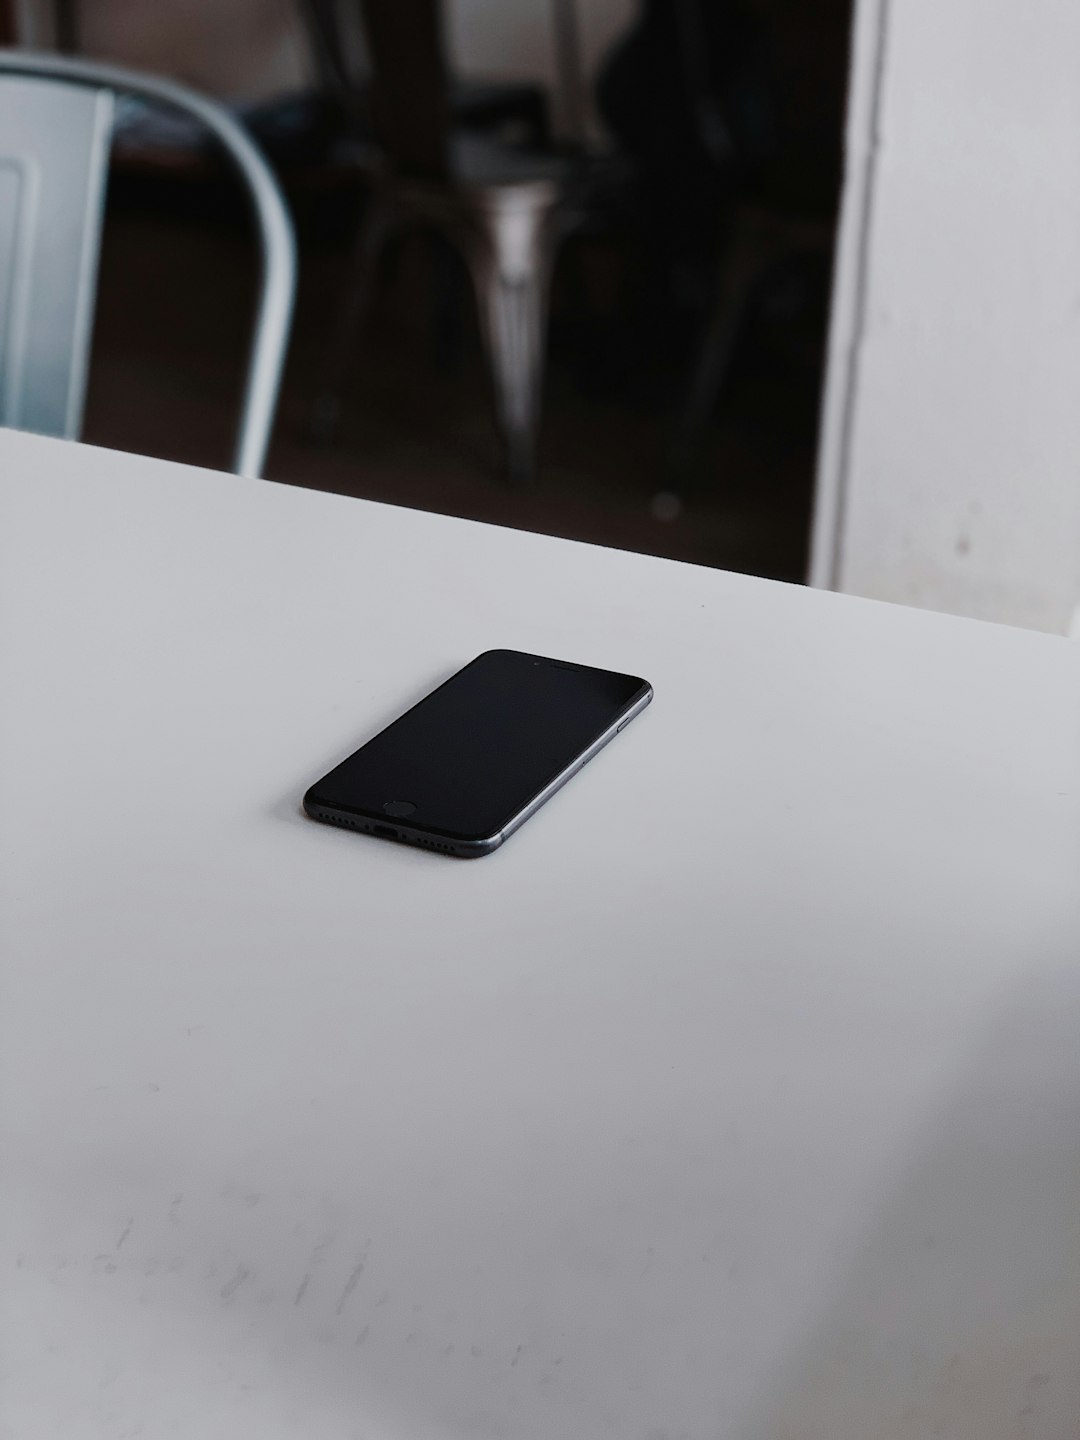 post-2014 iPhone on white table